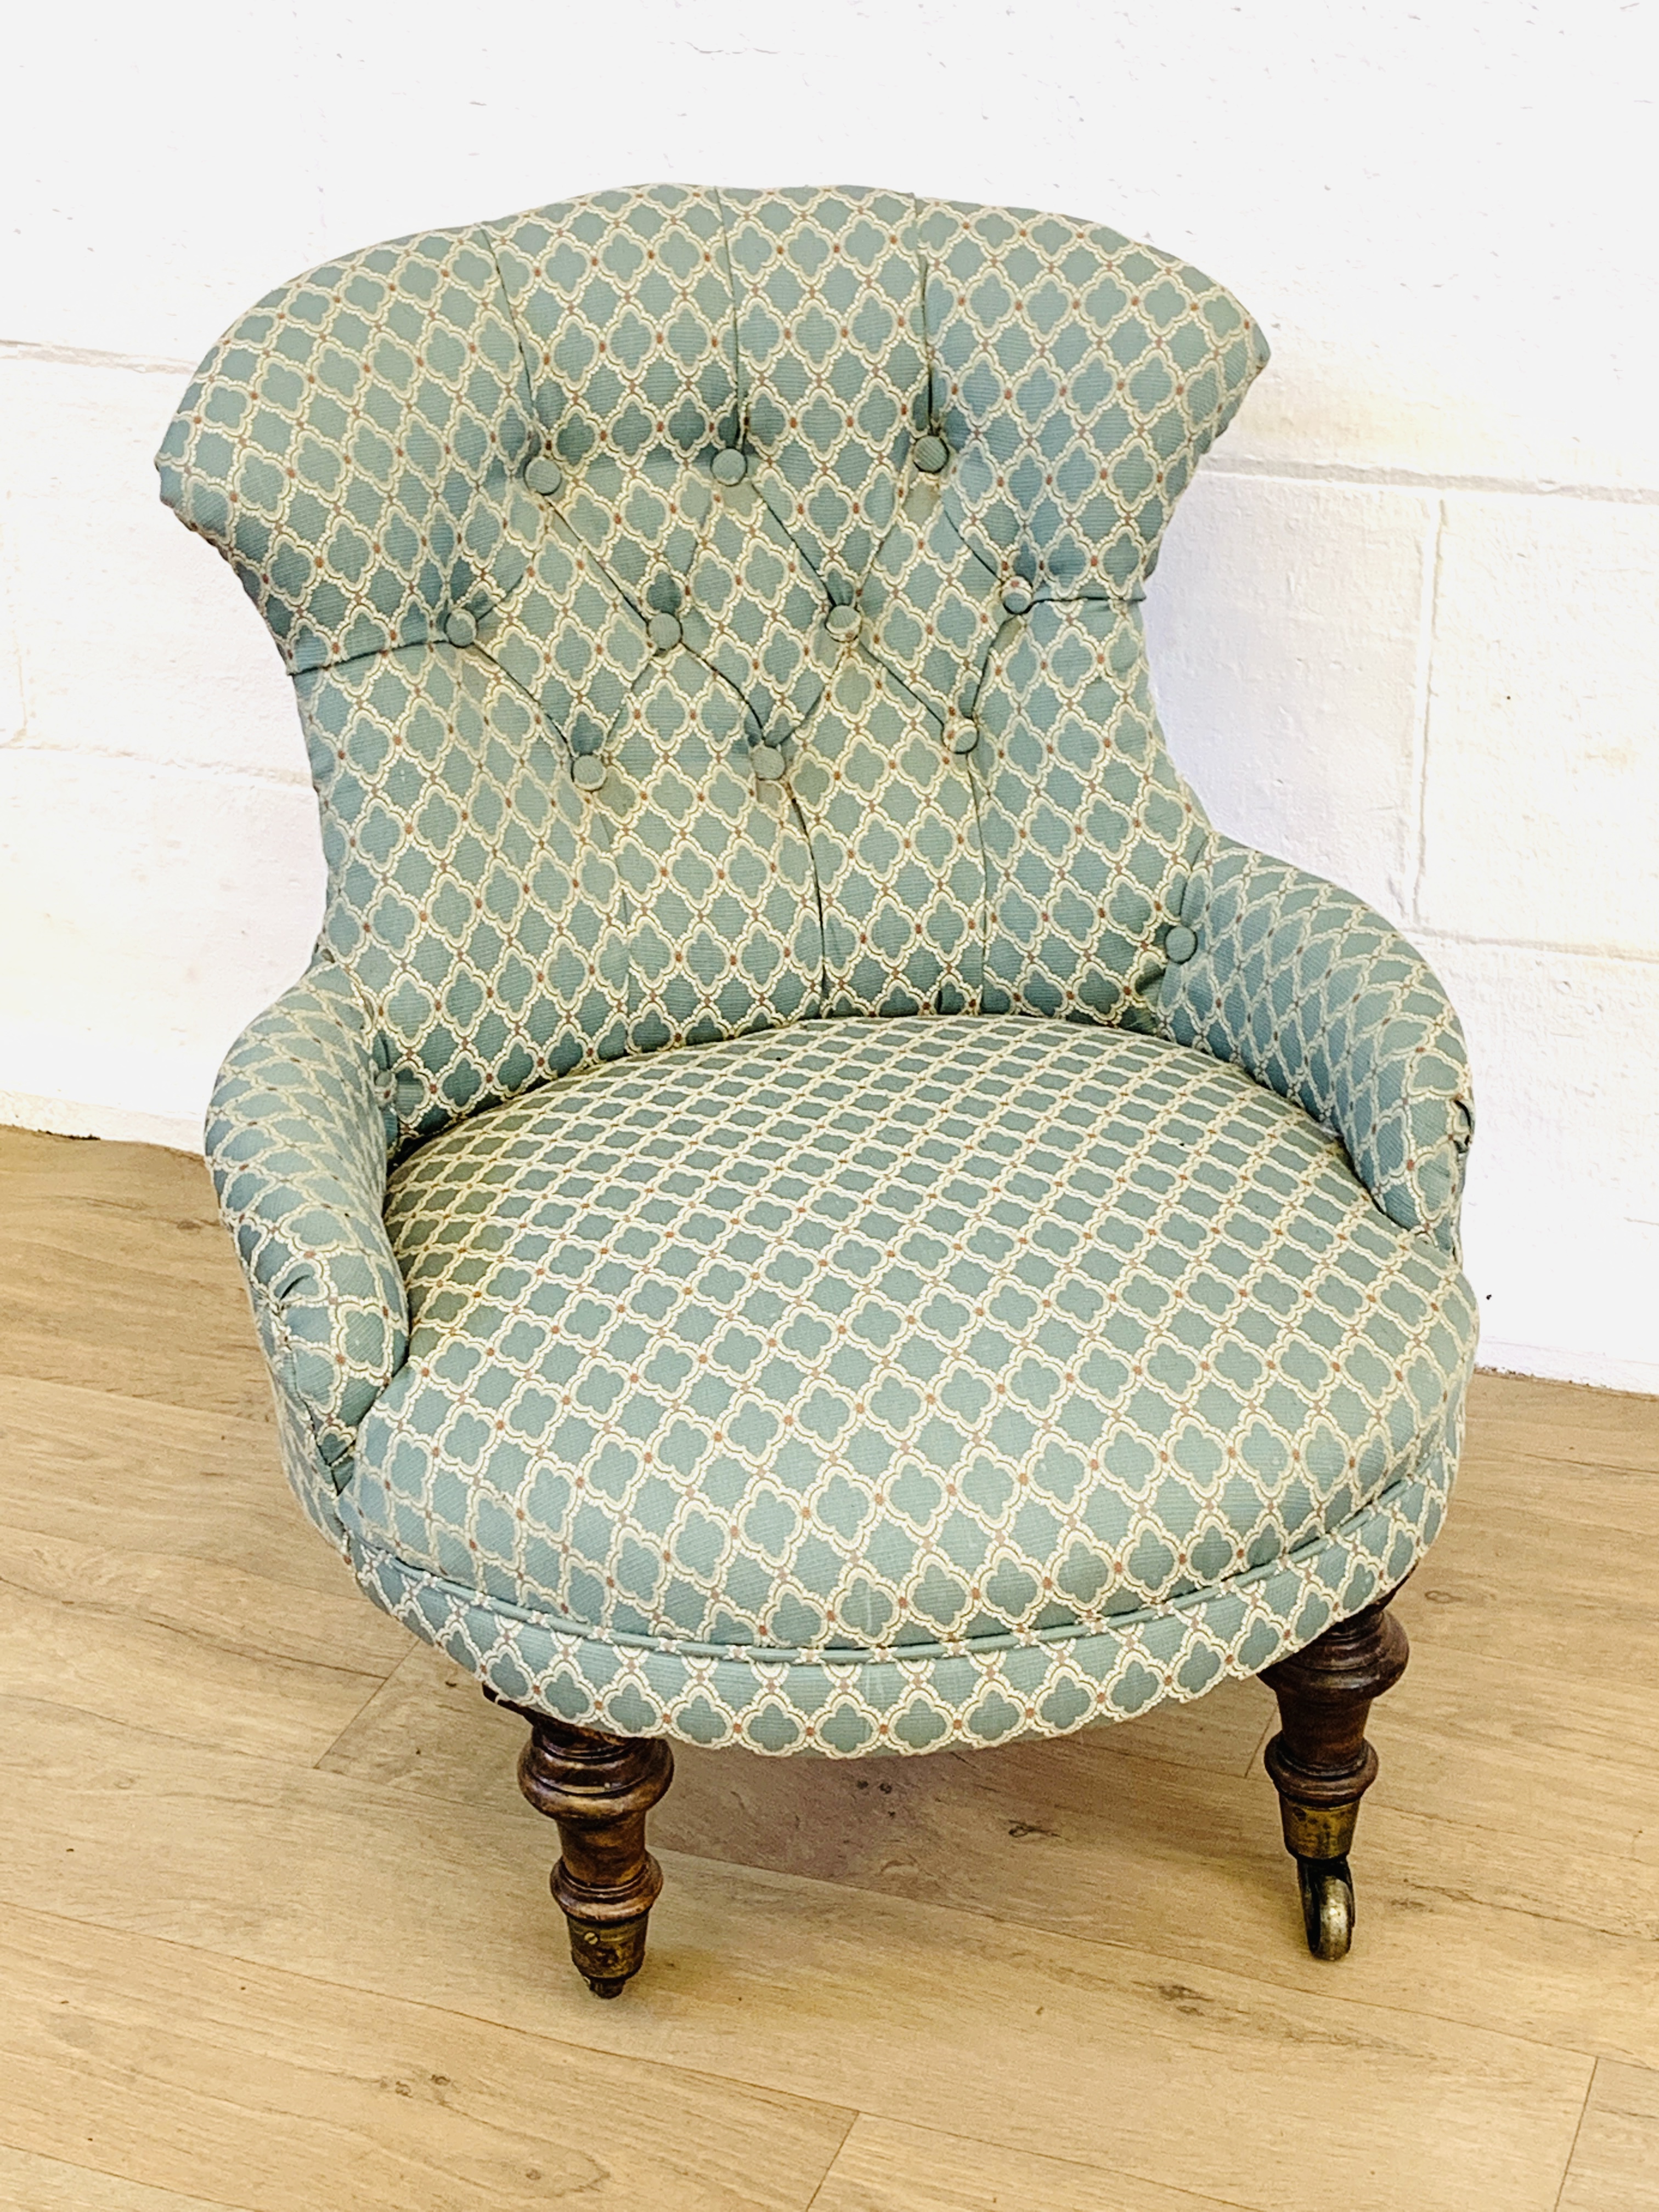 Upholstered button back bedroom chair - Image 3 of 5